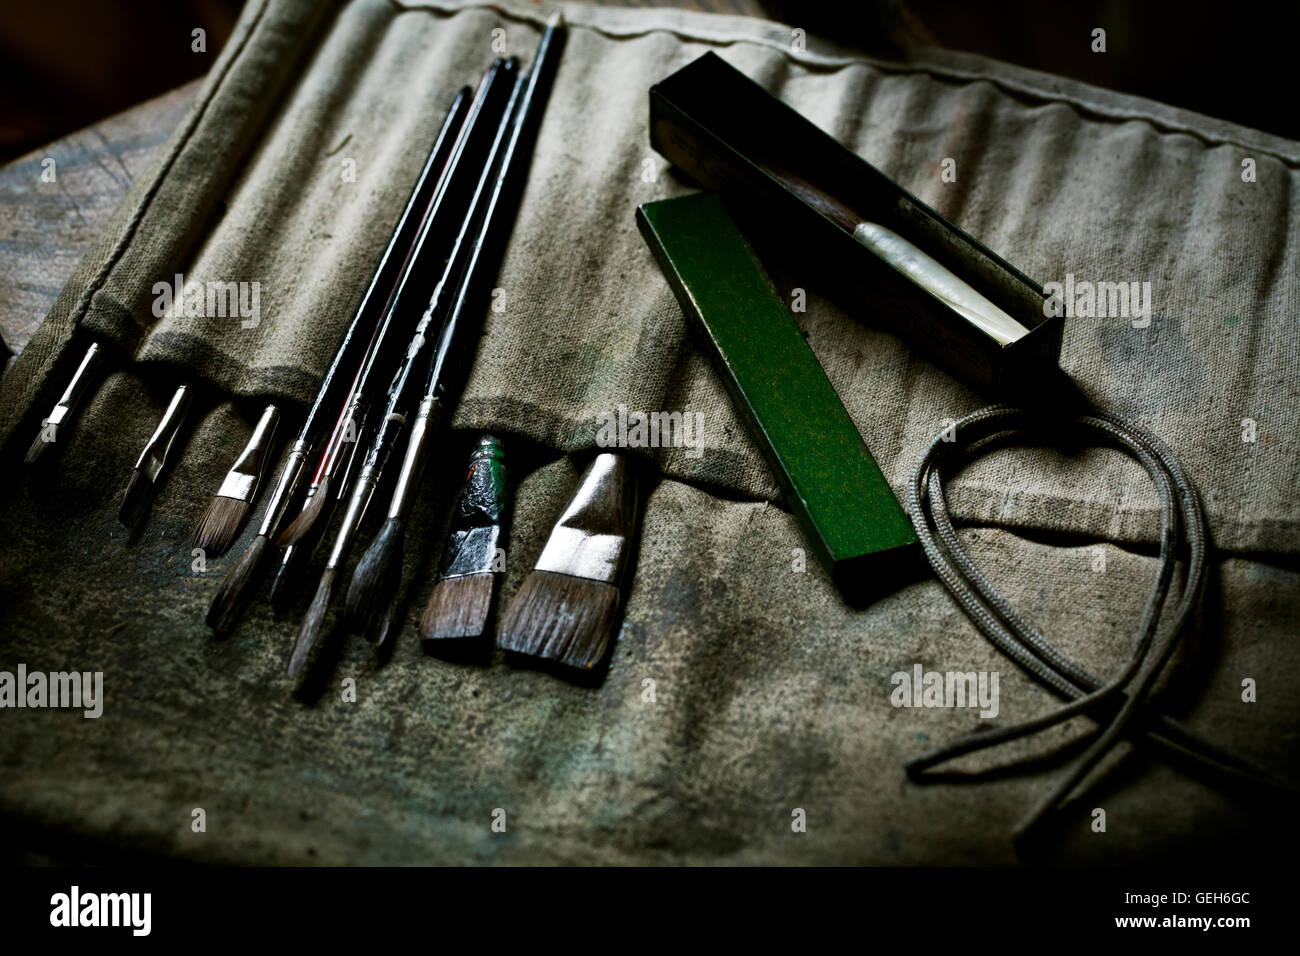 A row of paint brushes and hand tools. Stock Photo